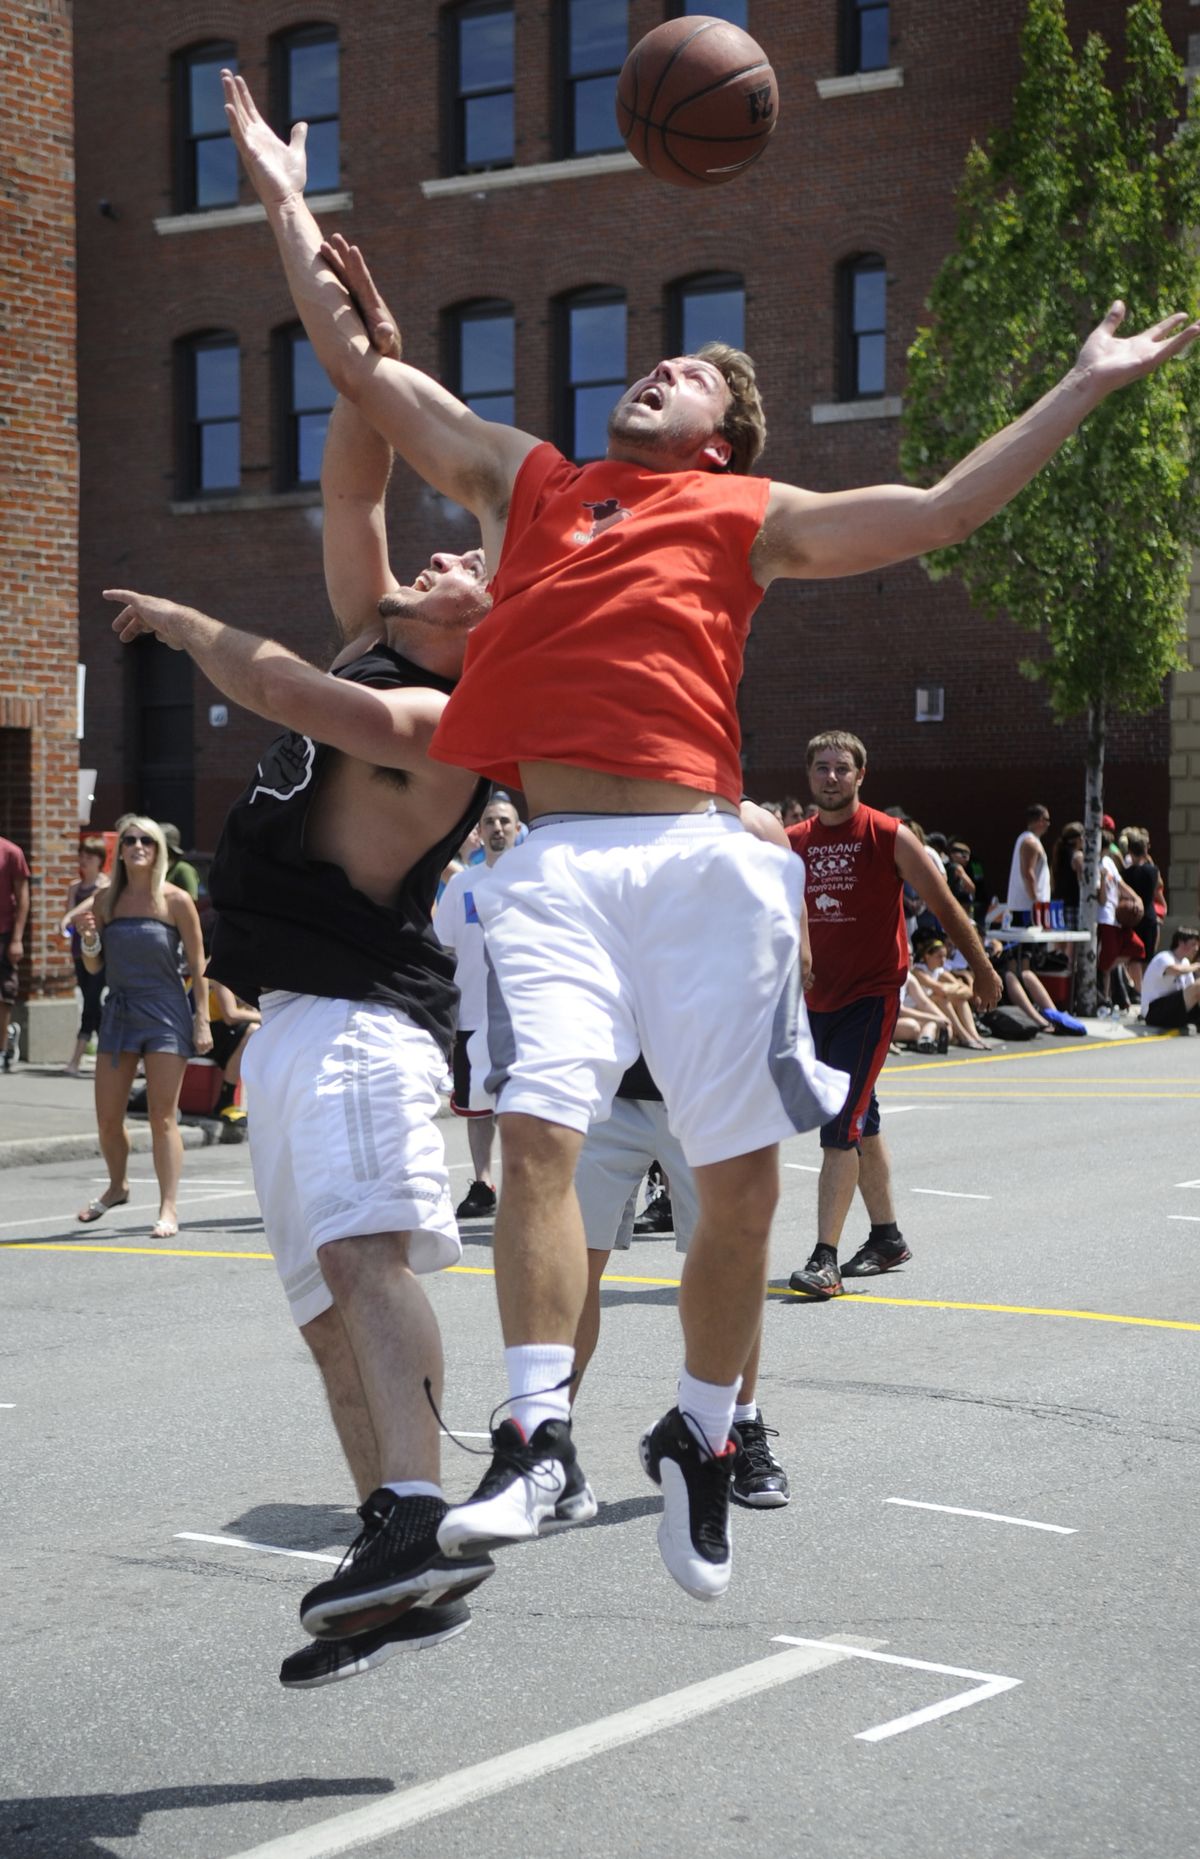 Mike Daffern of the Fish Sticks and Johnny Fredrick of the Bobby Dills compete for a rebound Saturday, June 26, 2010, at Hoopfest. The Fish Sticks won the game in overtime 16-15. (Colin Mulvany / The Spokesman-Review)